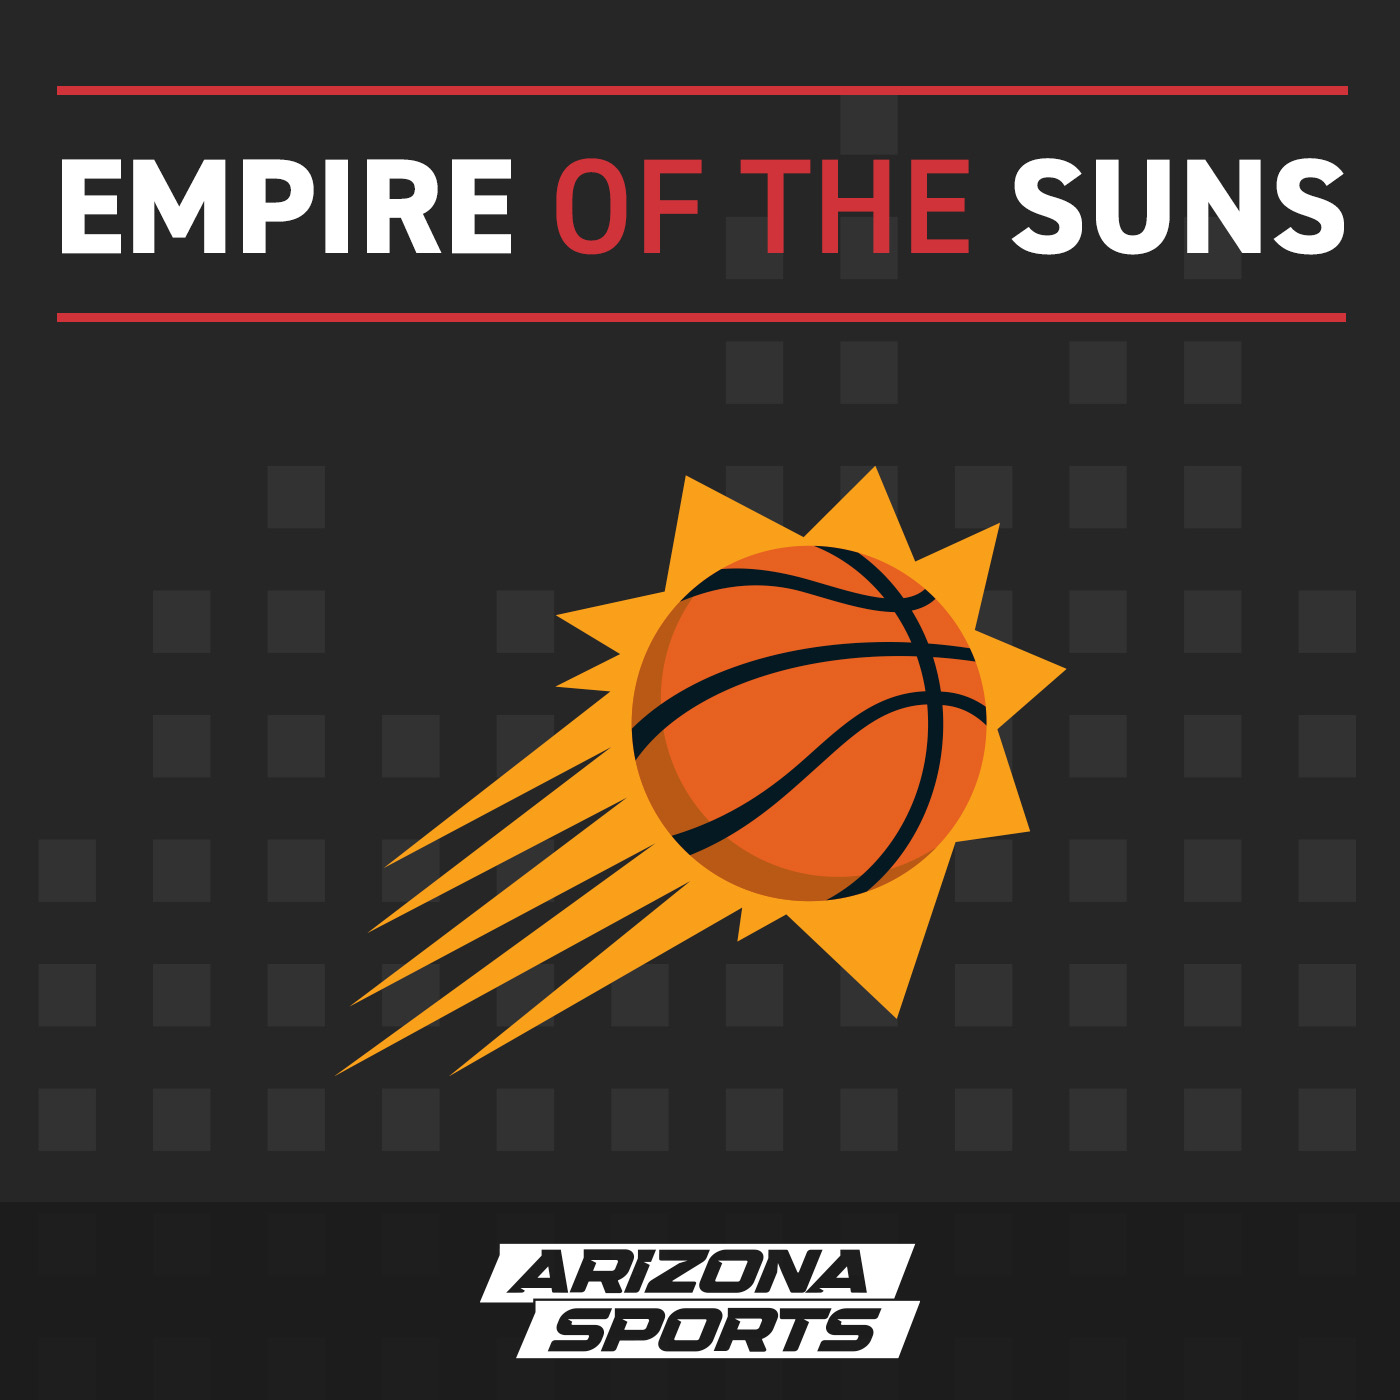 Empire of the Suns LIVE: Suns free agency breakdown part 1 – July 3